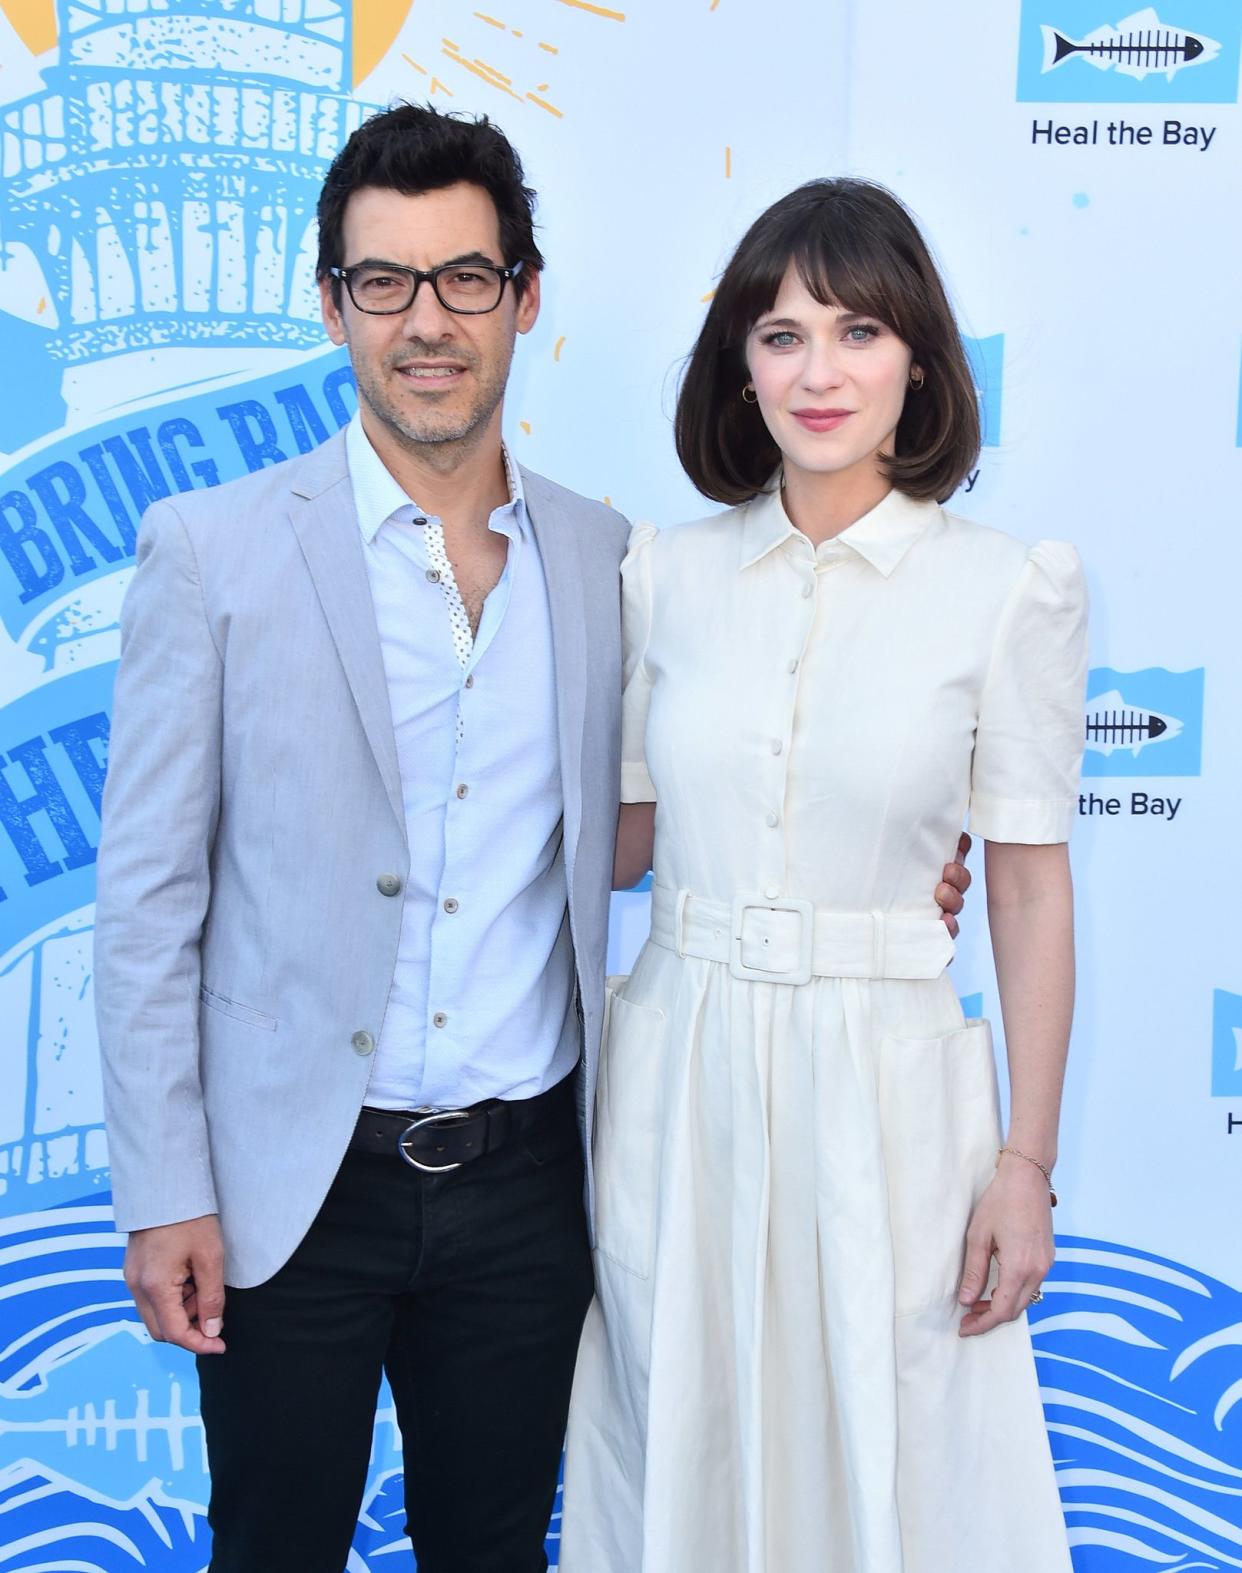 Zooey Deschanel and her husband Jacob Pechenik have broken up after four years of marriage. “After much discussion and a long period of contemplation we have decided we are better off as friends, business partners and co-parents rather than life partners,” the couple said in a statement on Sept. 6, 2019. “We remain committed to our business, our values, and most of all, our children. Thank you for respecting our privacy at this time.” The “New Girl” star and Pechenik, a producer, were first linked in 2014. They announced their engagement in January 2015 and wed six months later in June. They are parents to daughter Elsie, 4, and son Charlie, 2.